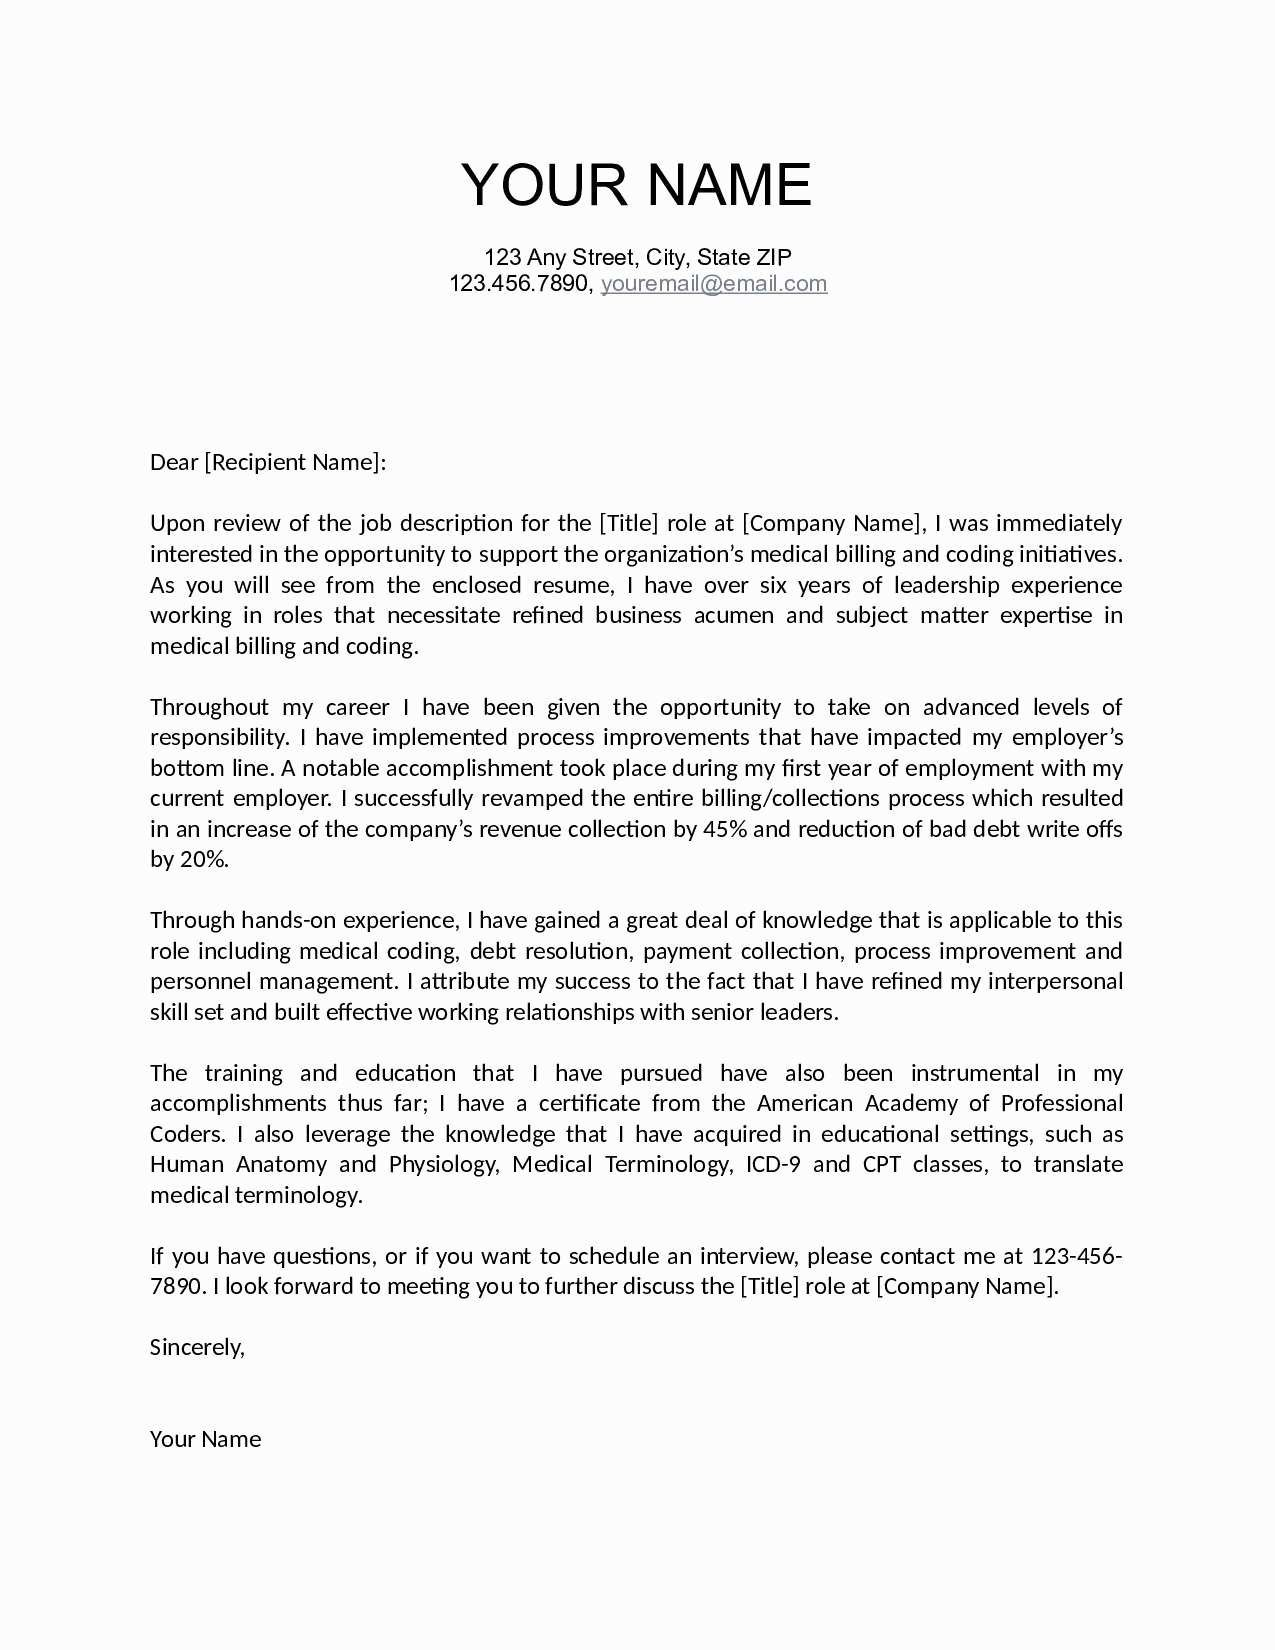 Expert Opinion Letter Template - Cover Letter for Oil and Gas Job Save Lovely Job Fer Letter Template